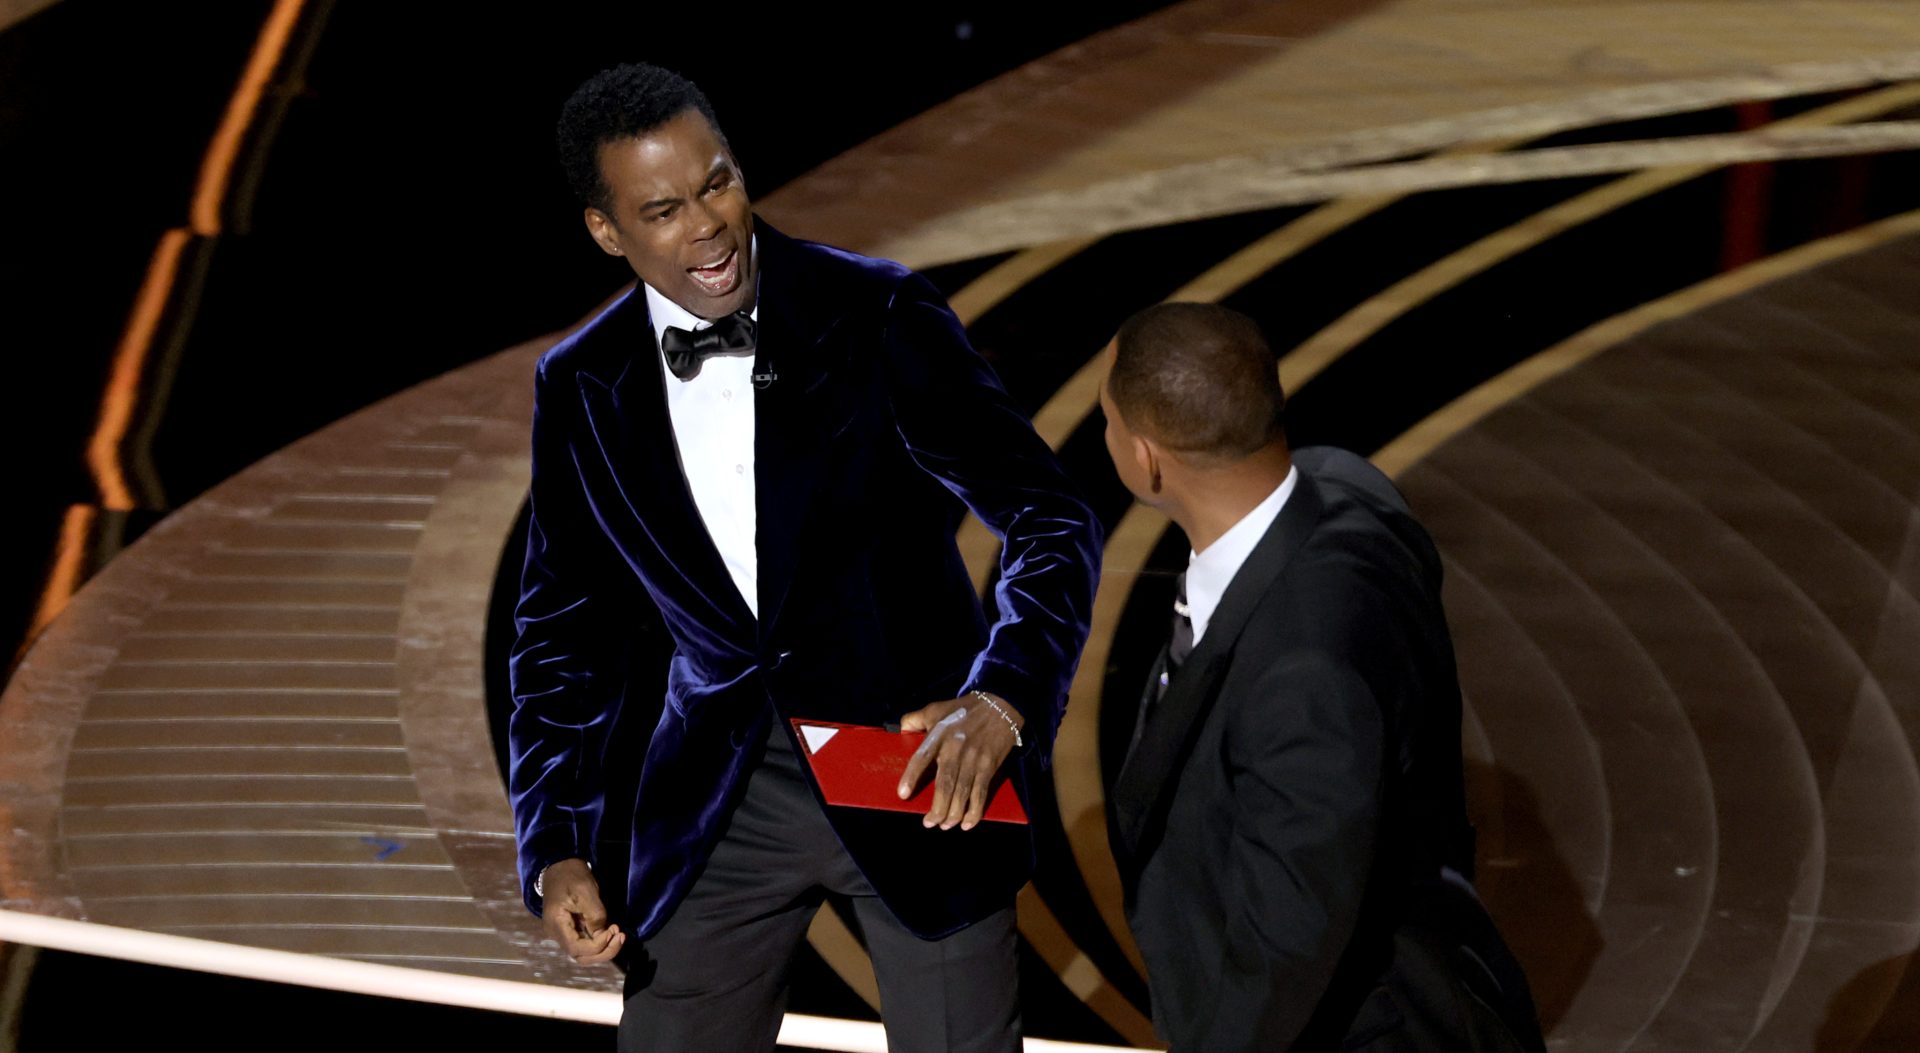 Twitter Reacts To Chris Rock Allegedly Addressing Will Smith Slap With ‘Emancipation’ Joke